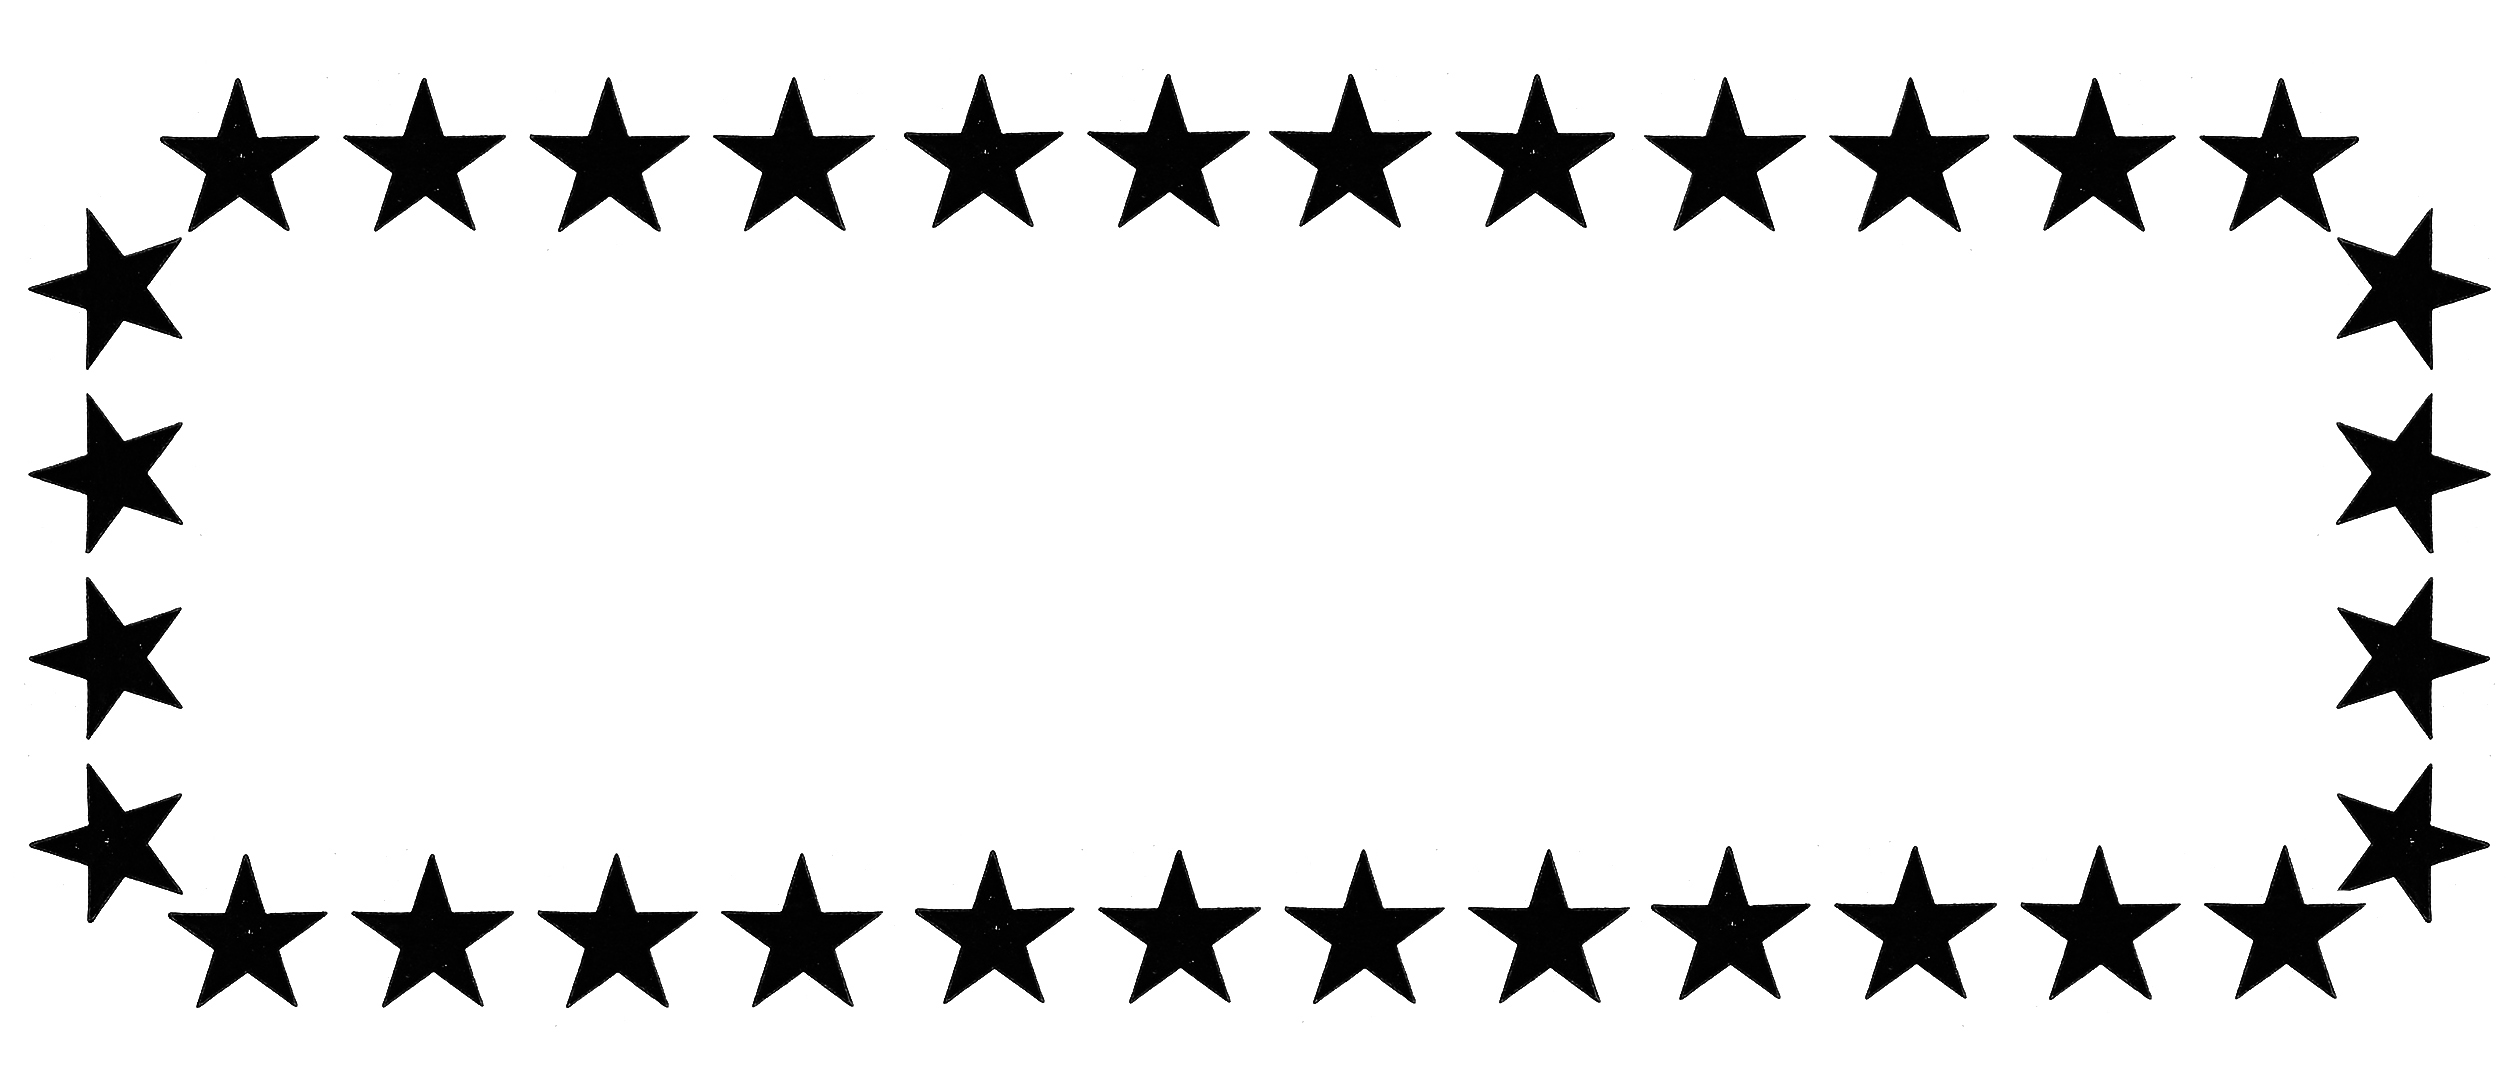 star clipart black and white